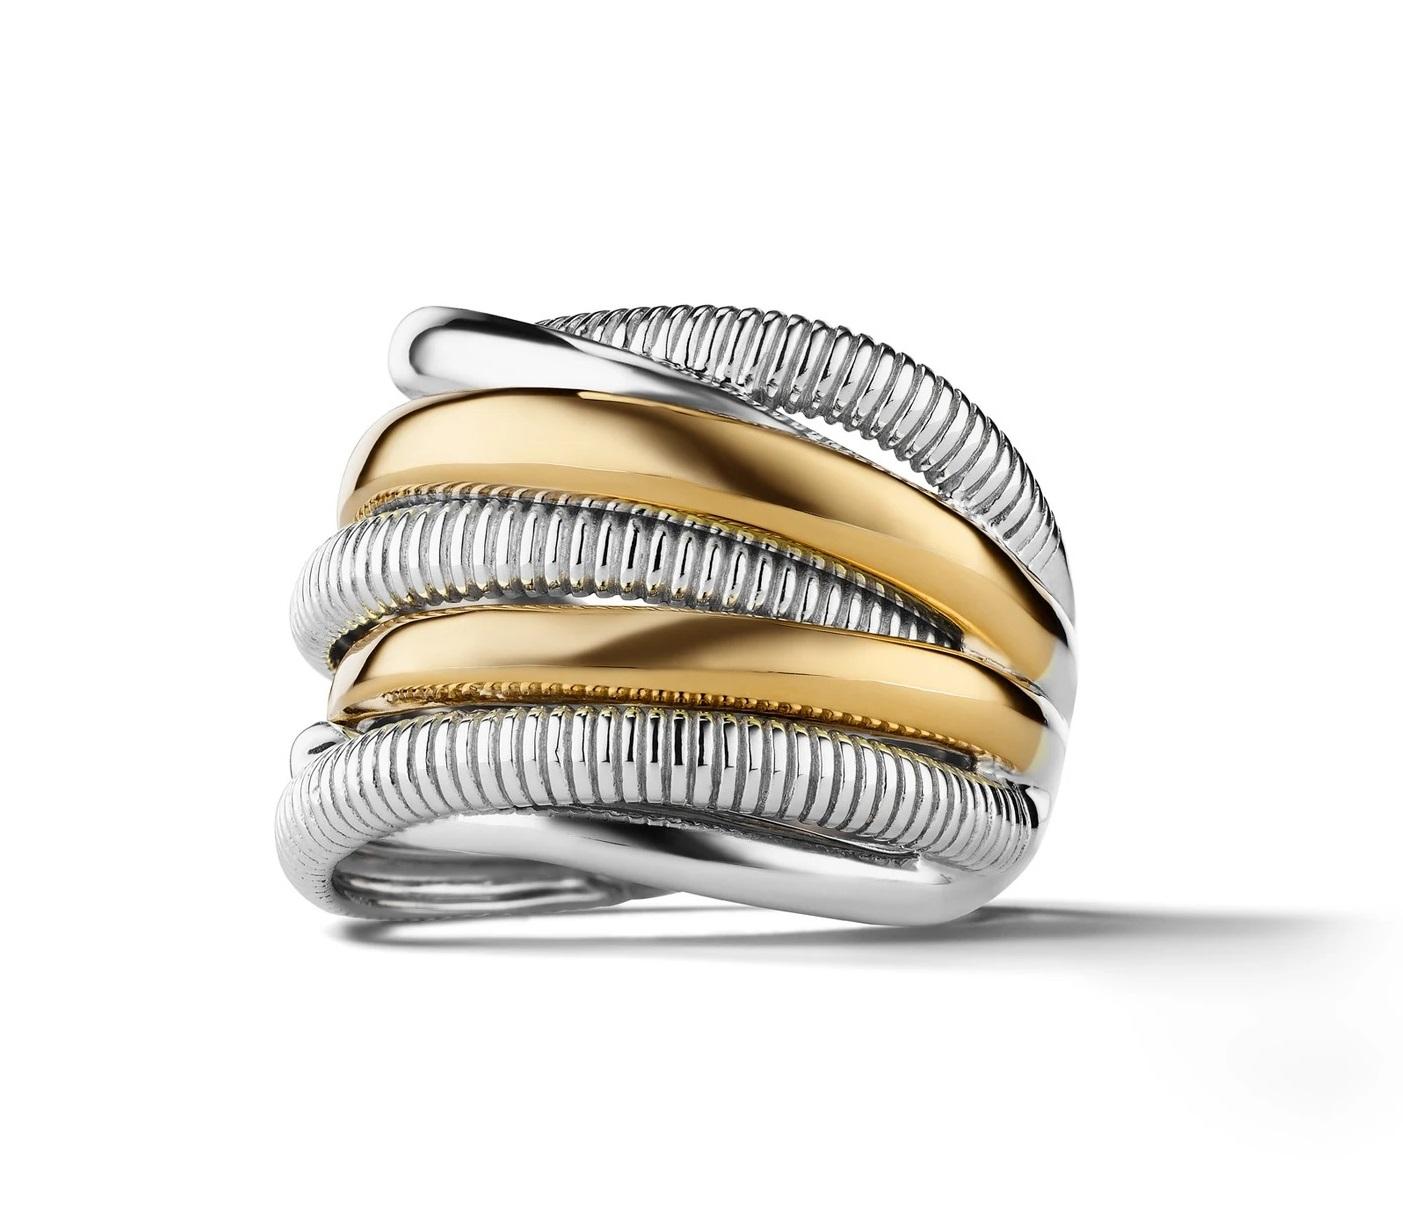 Our coveted Eternity Highway Ring reflects the original design that the entire collection was built upon. The modern, sculptural, intertwining texture and high polish bands represent the eternal love in our lives.

Sterling Silver with Solid18K